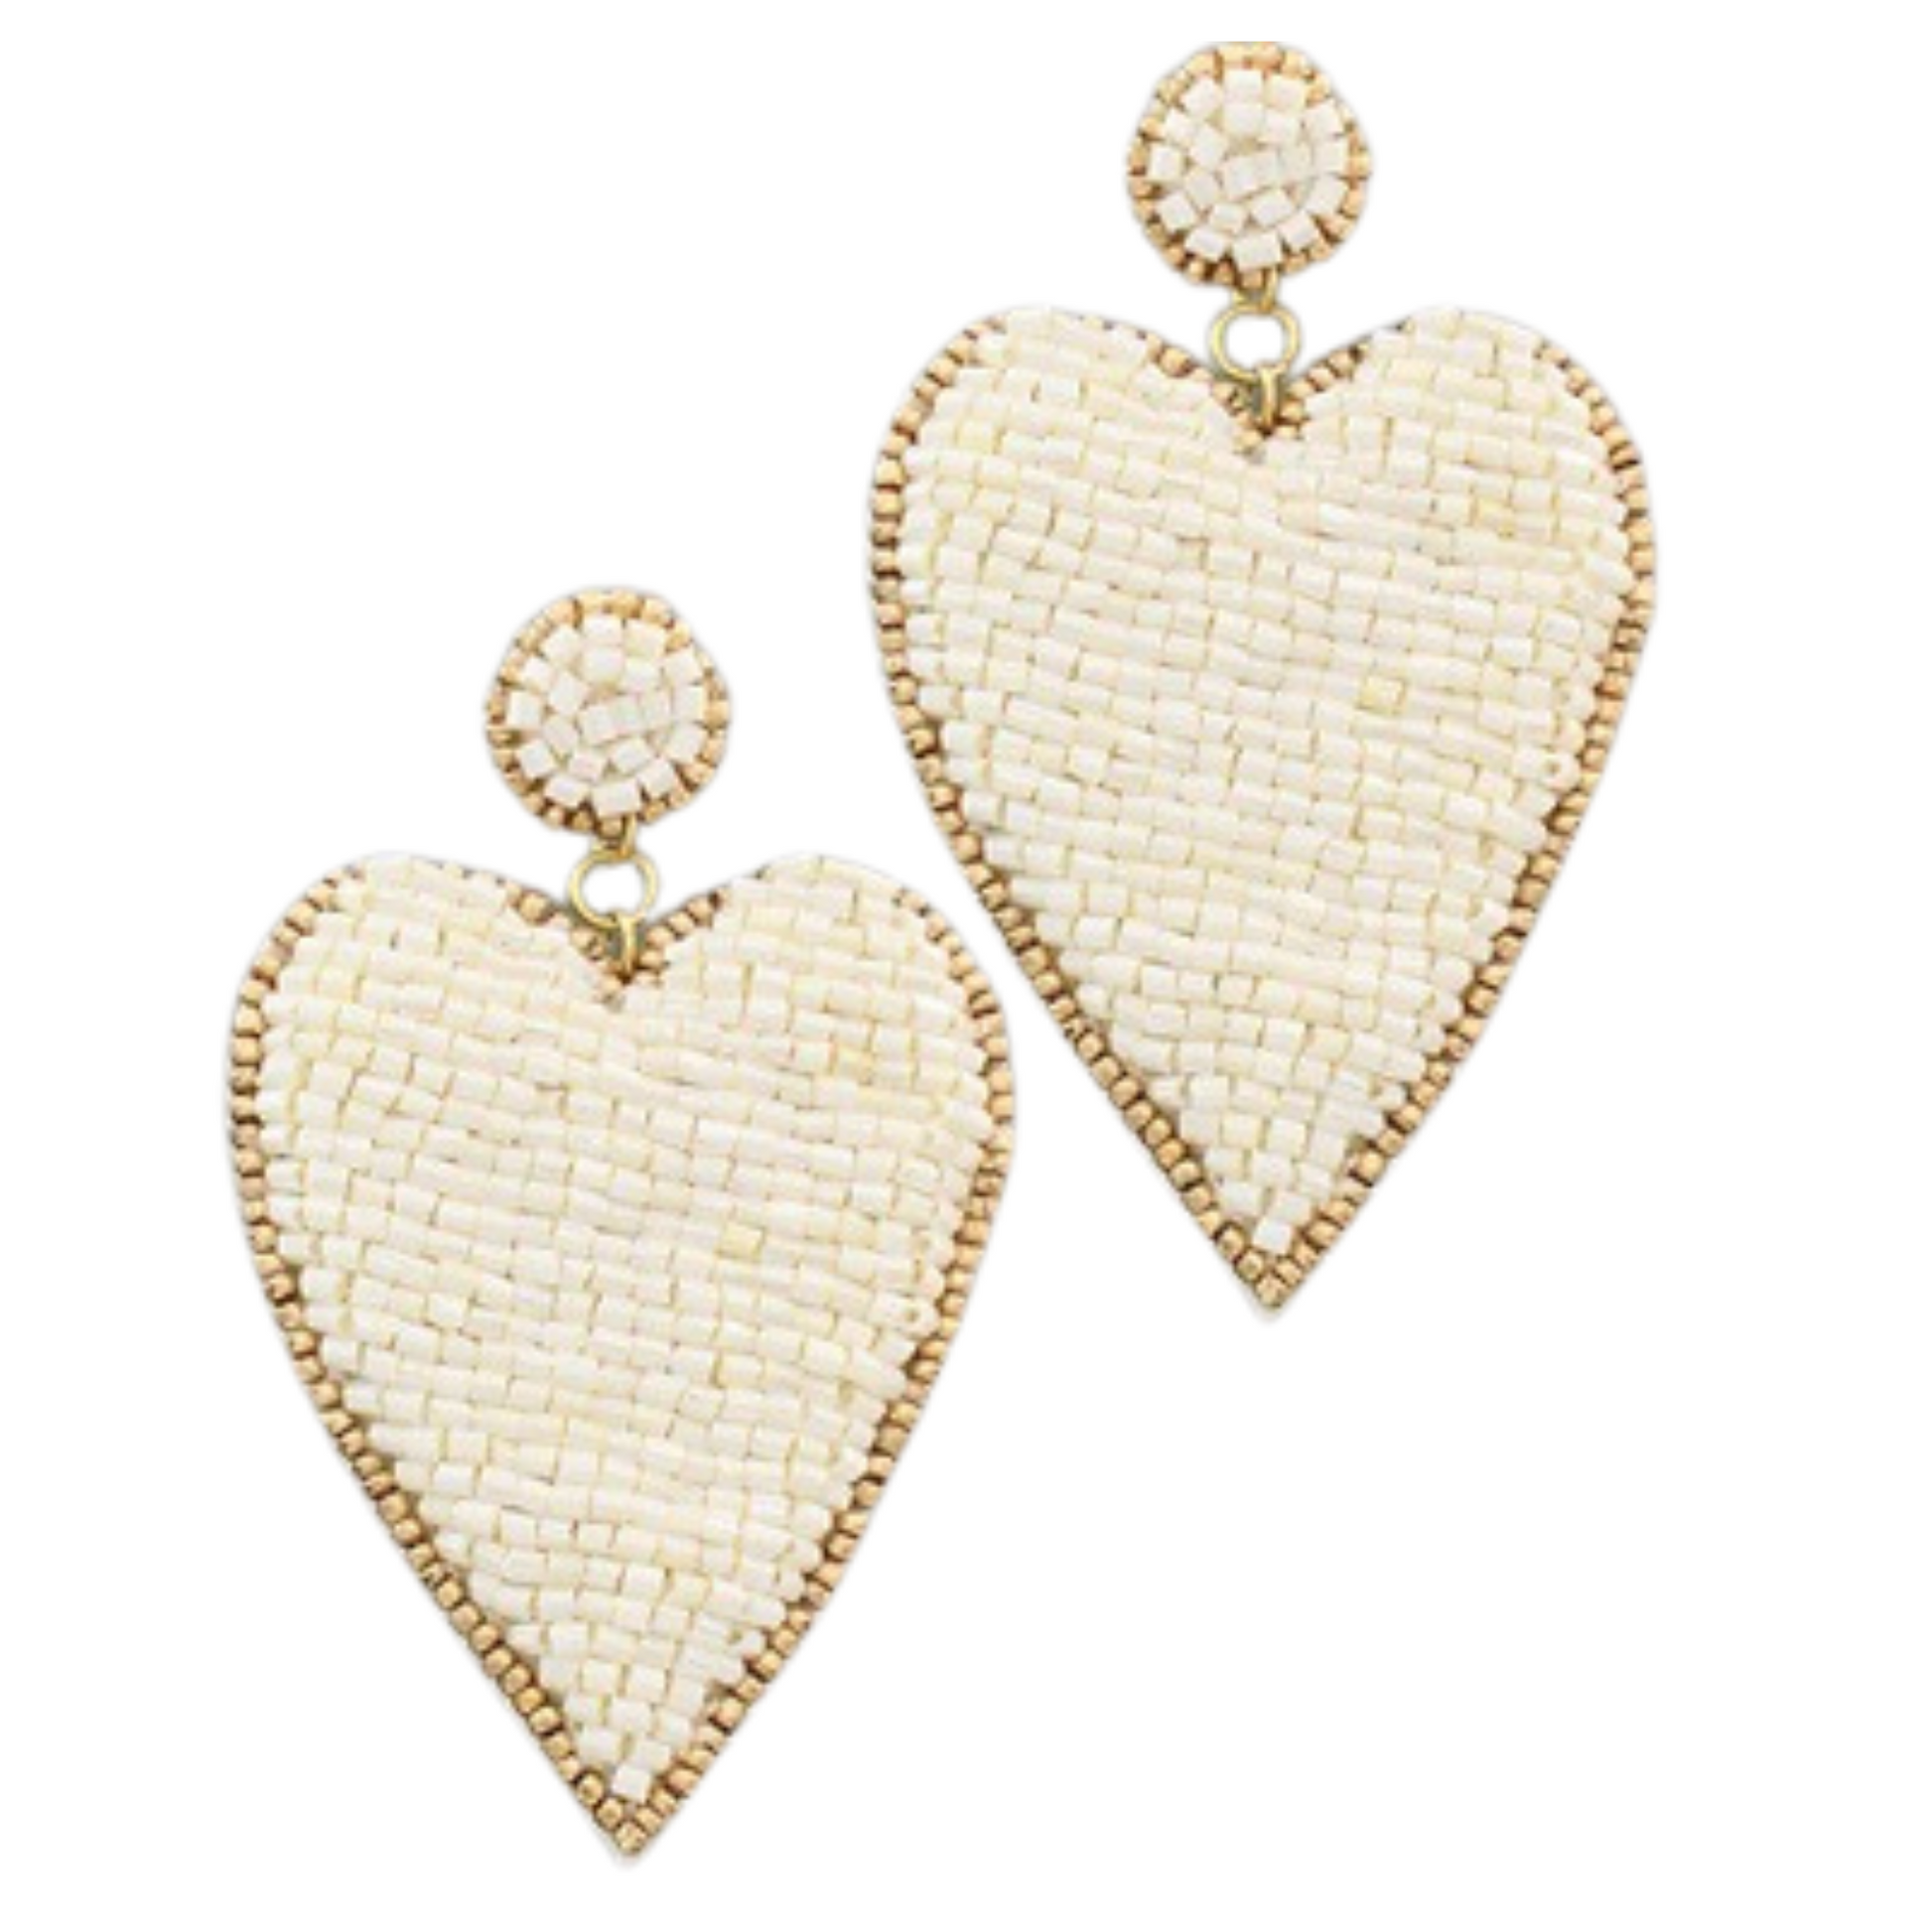 Enhance your style with our Heart Bead Earrings. These elegant dangle earrings feature a unique heart-shaped design and ivory-colored beads that add a touch of sophistication to any outfit. Perfect for any occasion, these earrings will make a statement and elevate your look.